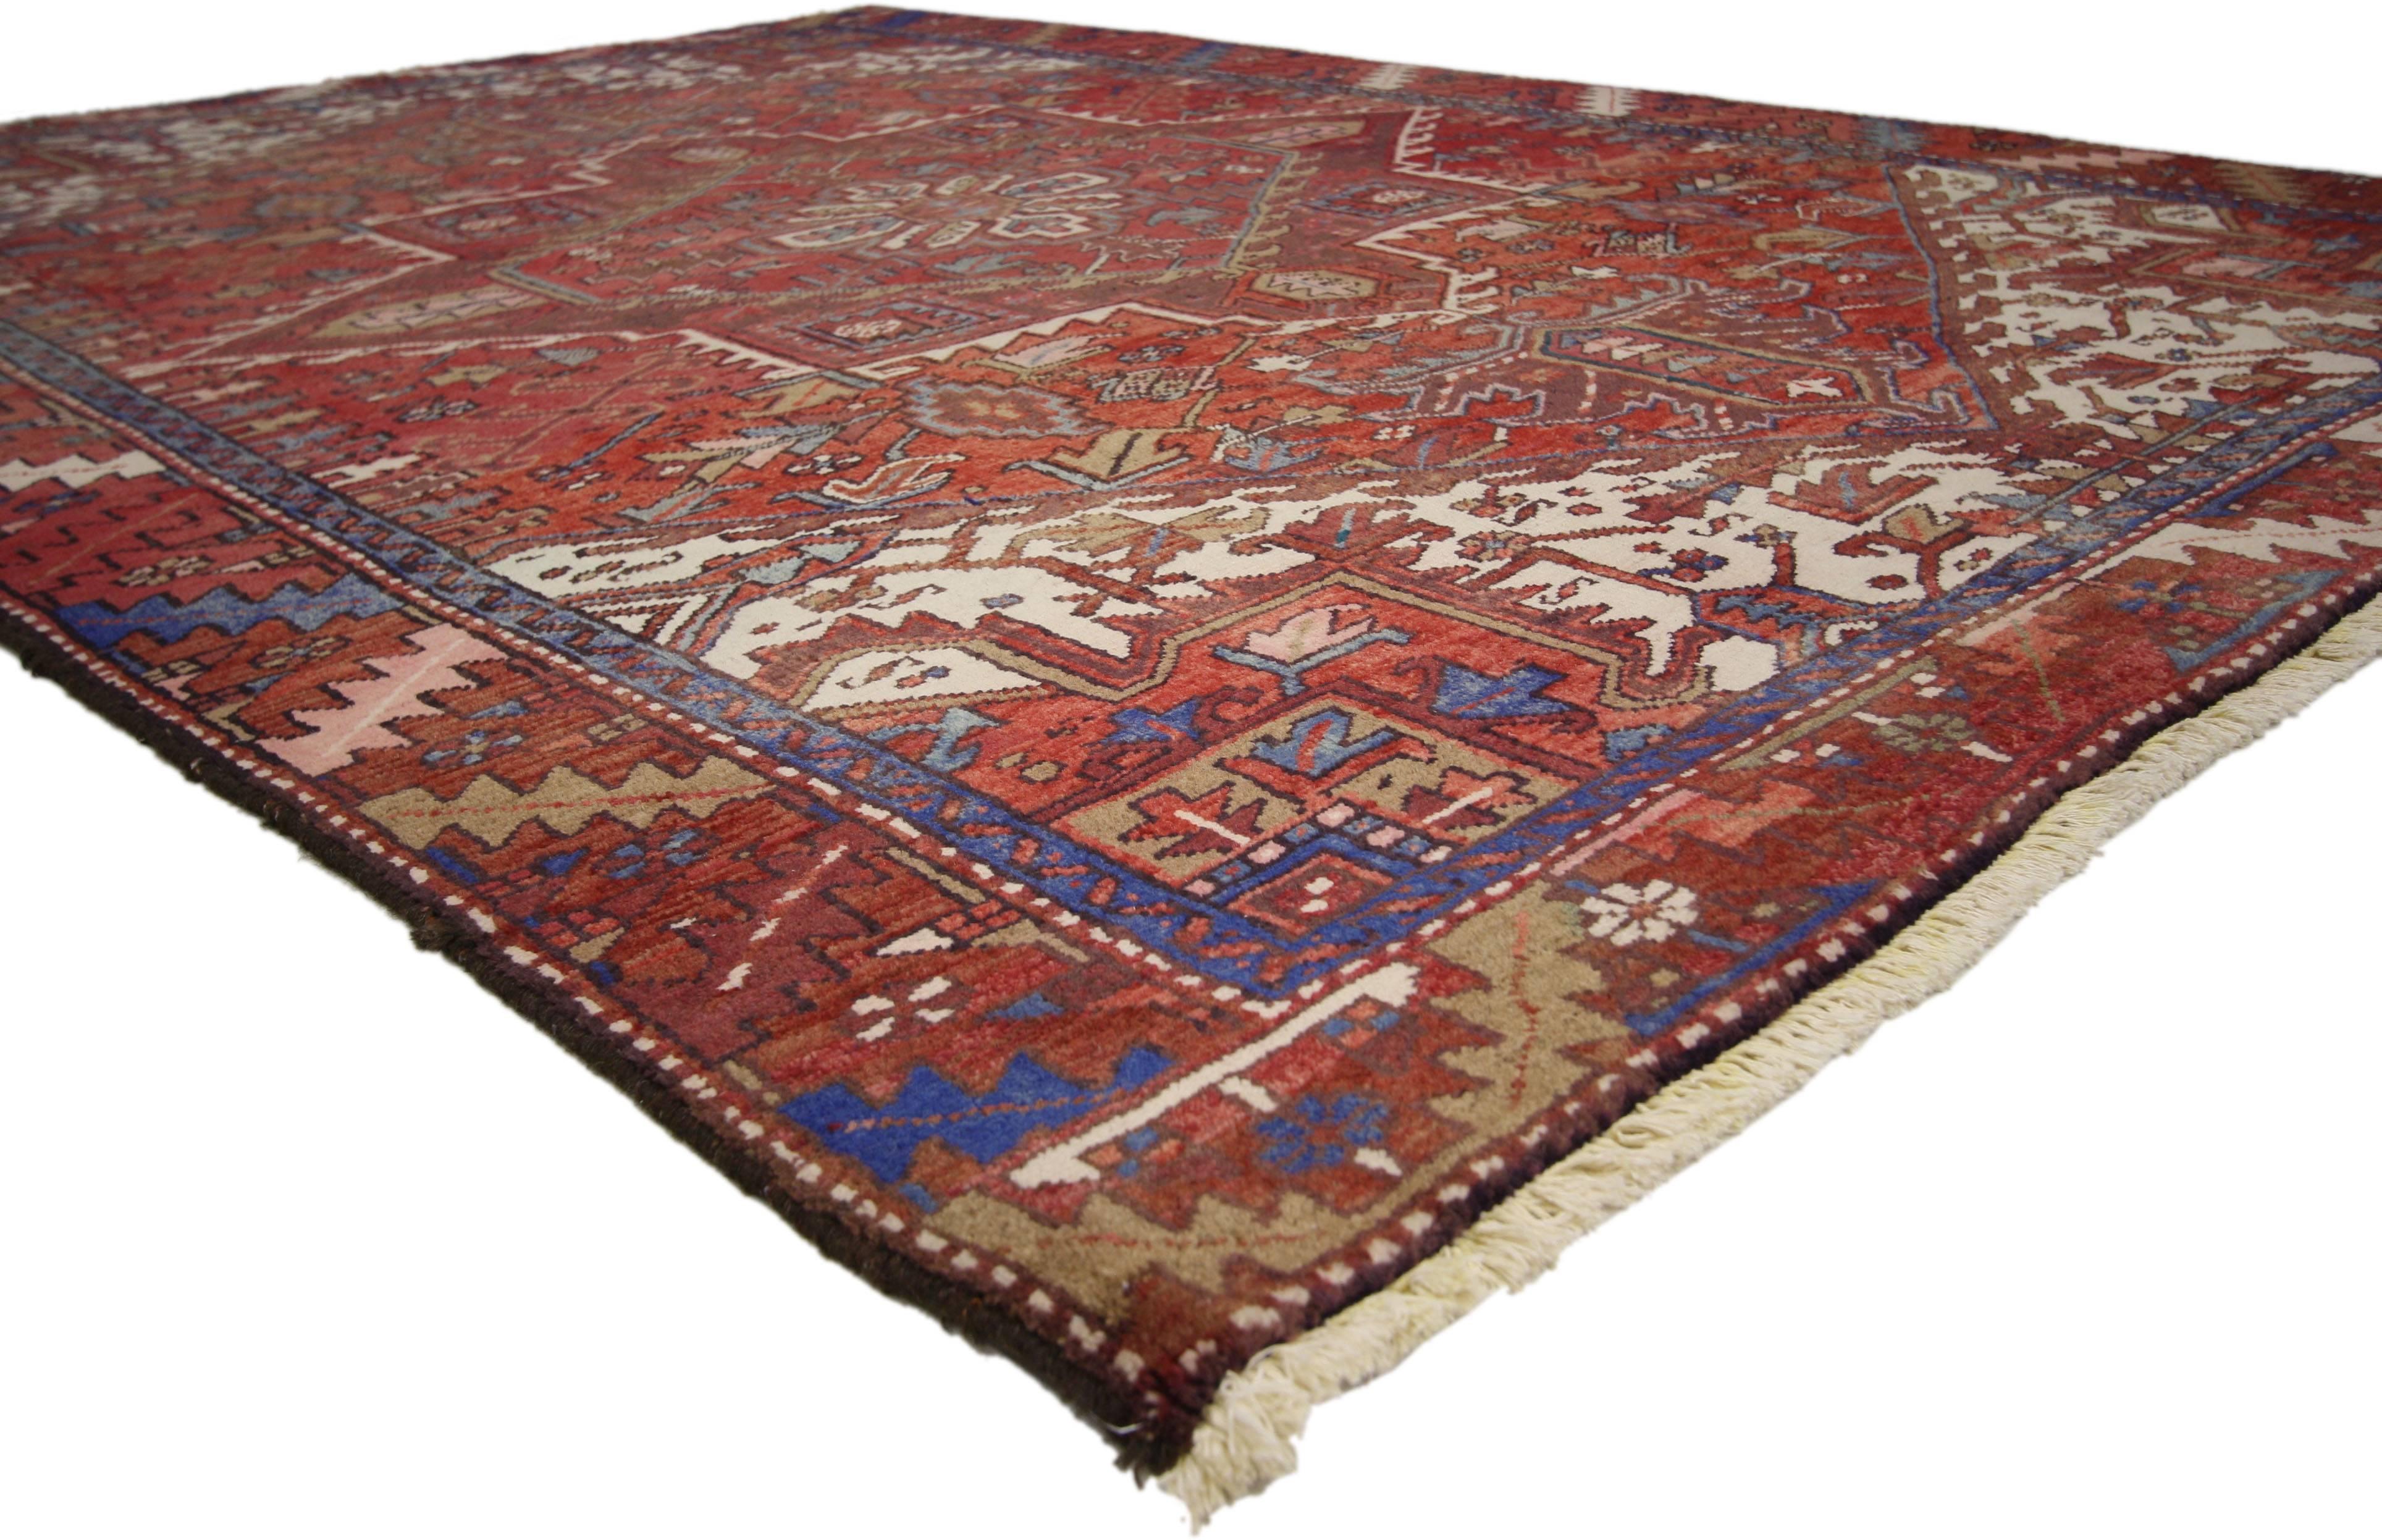 76242, Vintage Persian Heriz Rug with modern English Cottage Tudor style. Traditional and regal with brilliant color, this vintage Persian Heriz area rug with Modern English Cottage Tudor style is comprised of a prominent octagram medallion flanked